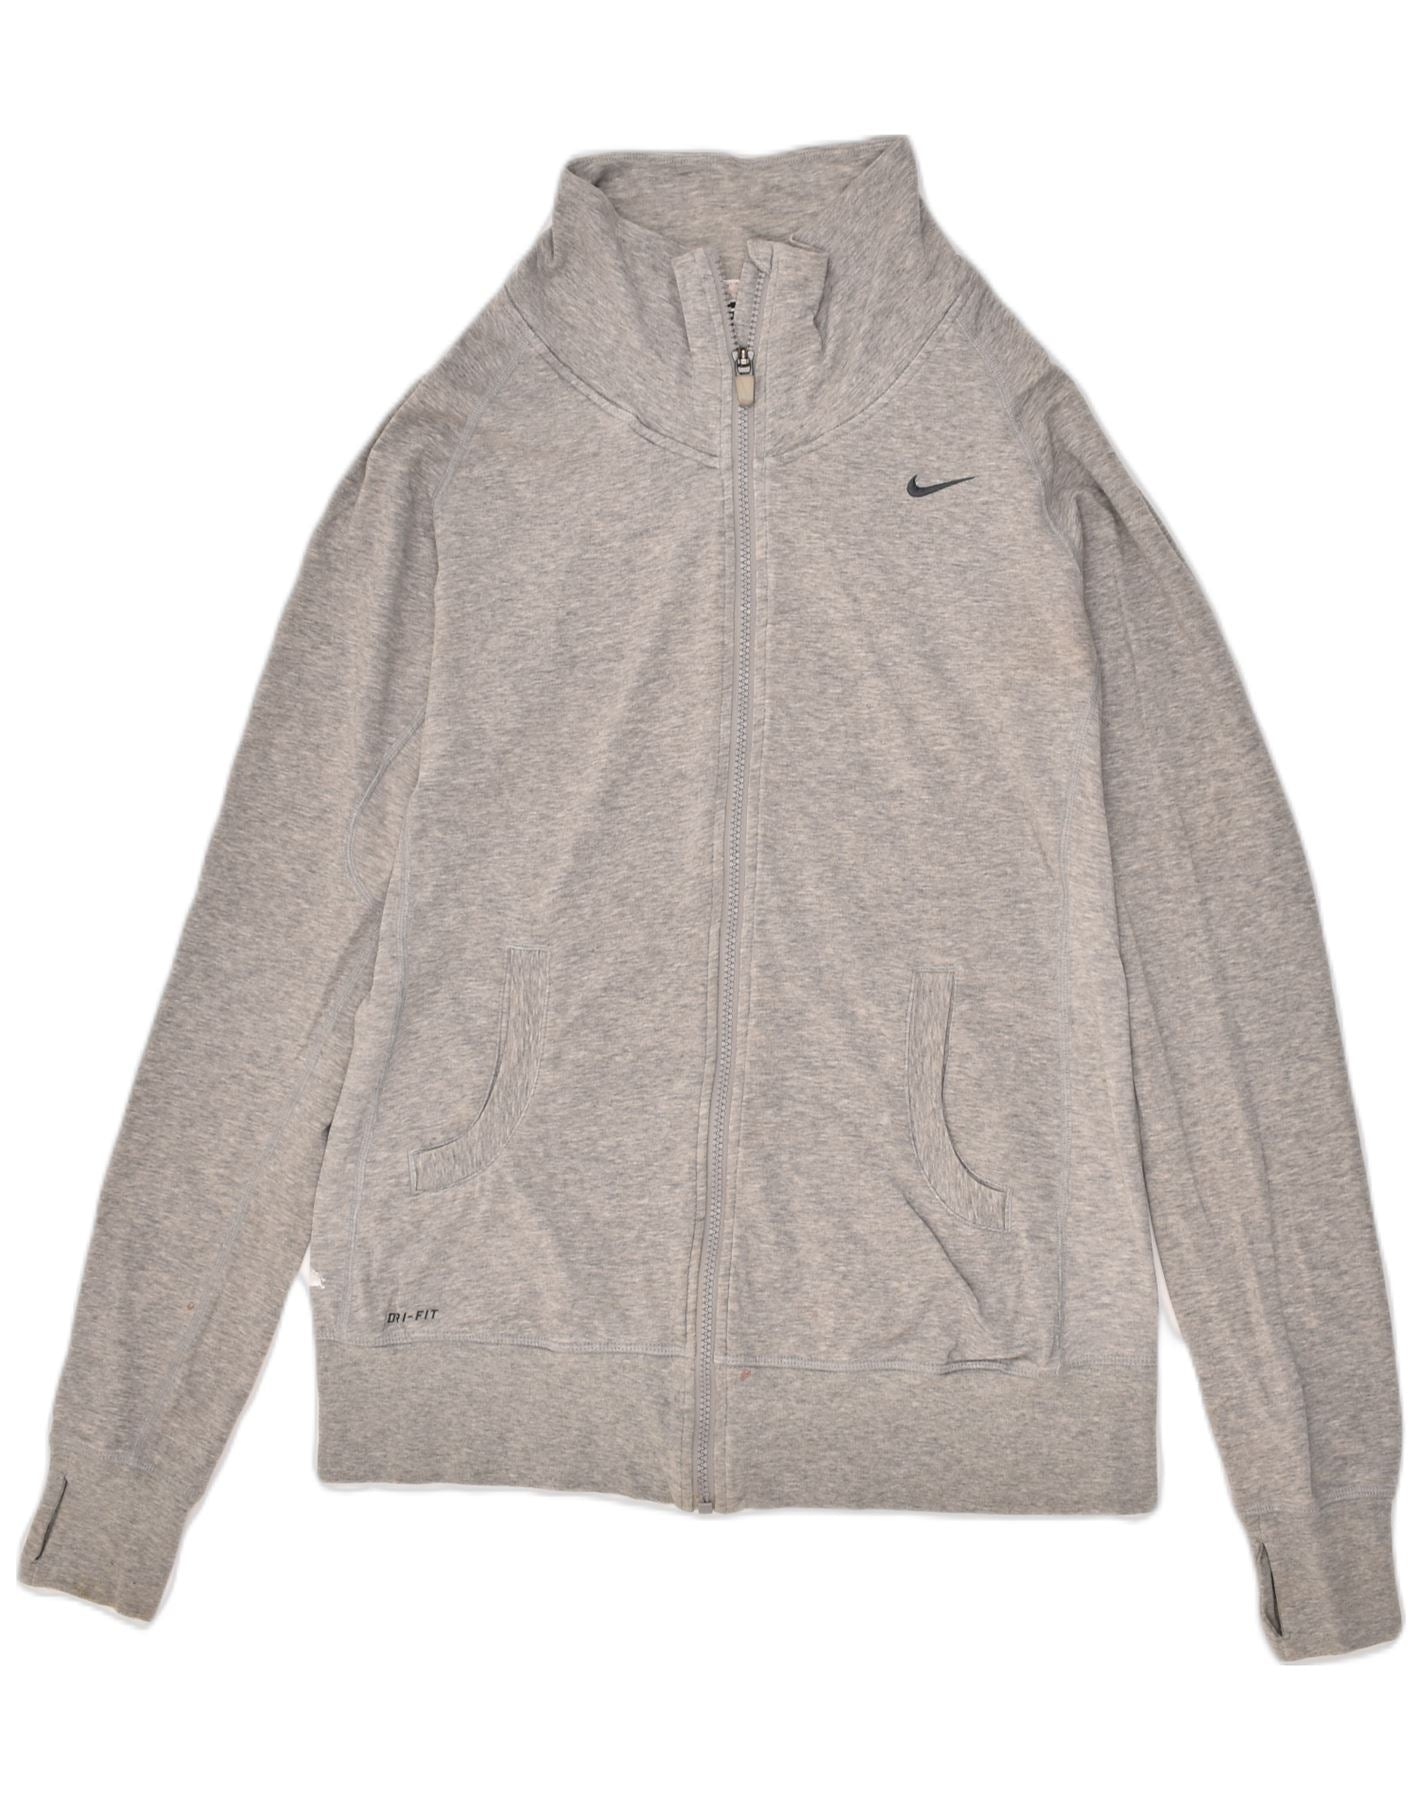 NIKE Womens Dri Fit Tracksuit Top Jacket UK 16 Large Grey Cotton, Vintage  & Second-Hand Clothing Online